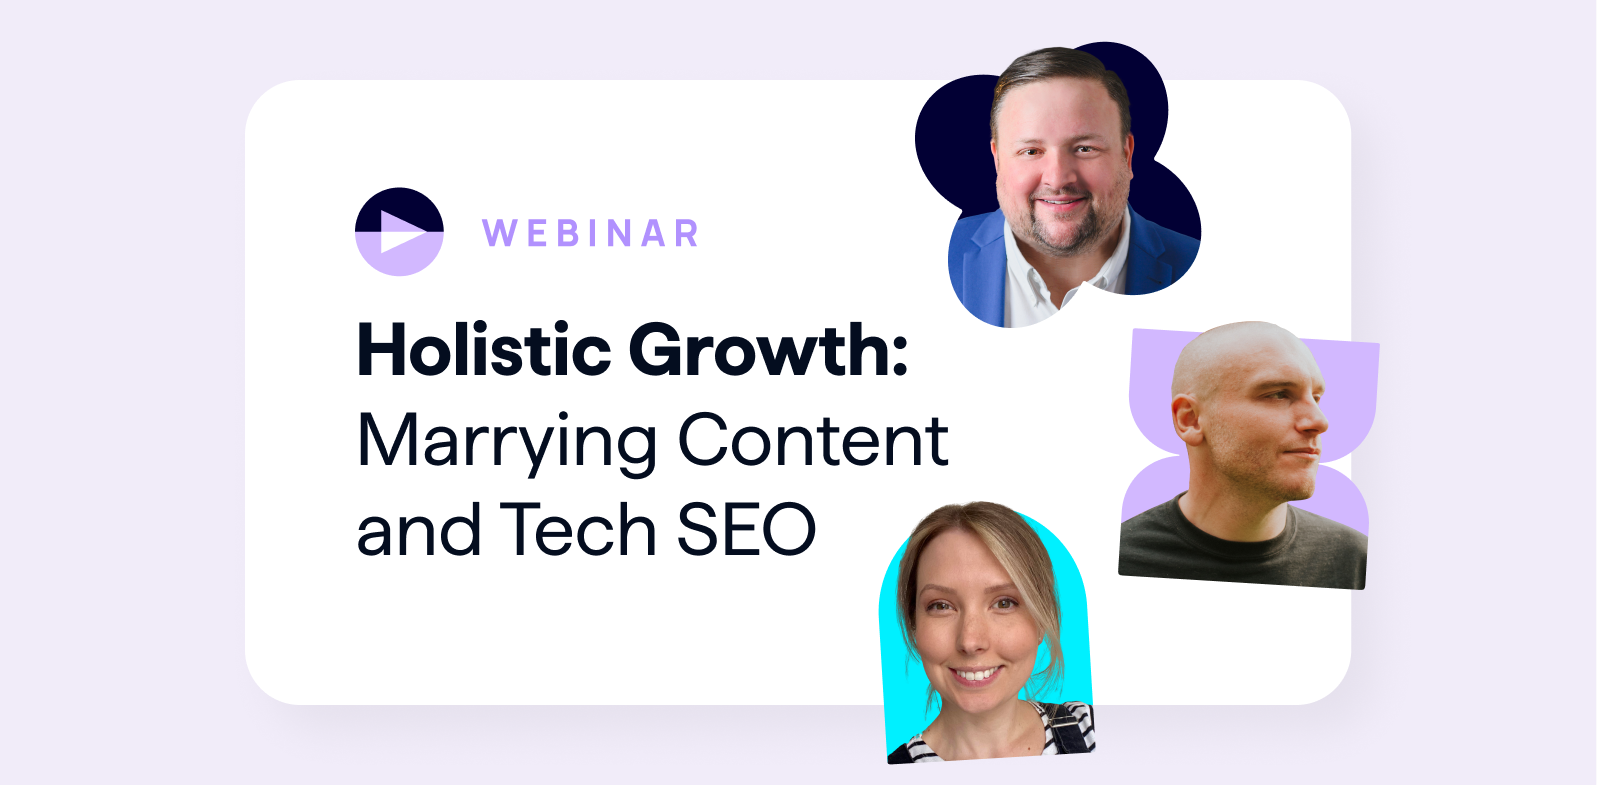 webinar on-demand video and recap featuring both Lumar and Pi Datametrics on how to grow holistically with content and technical SEO